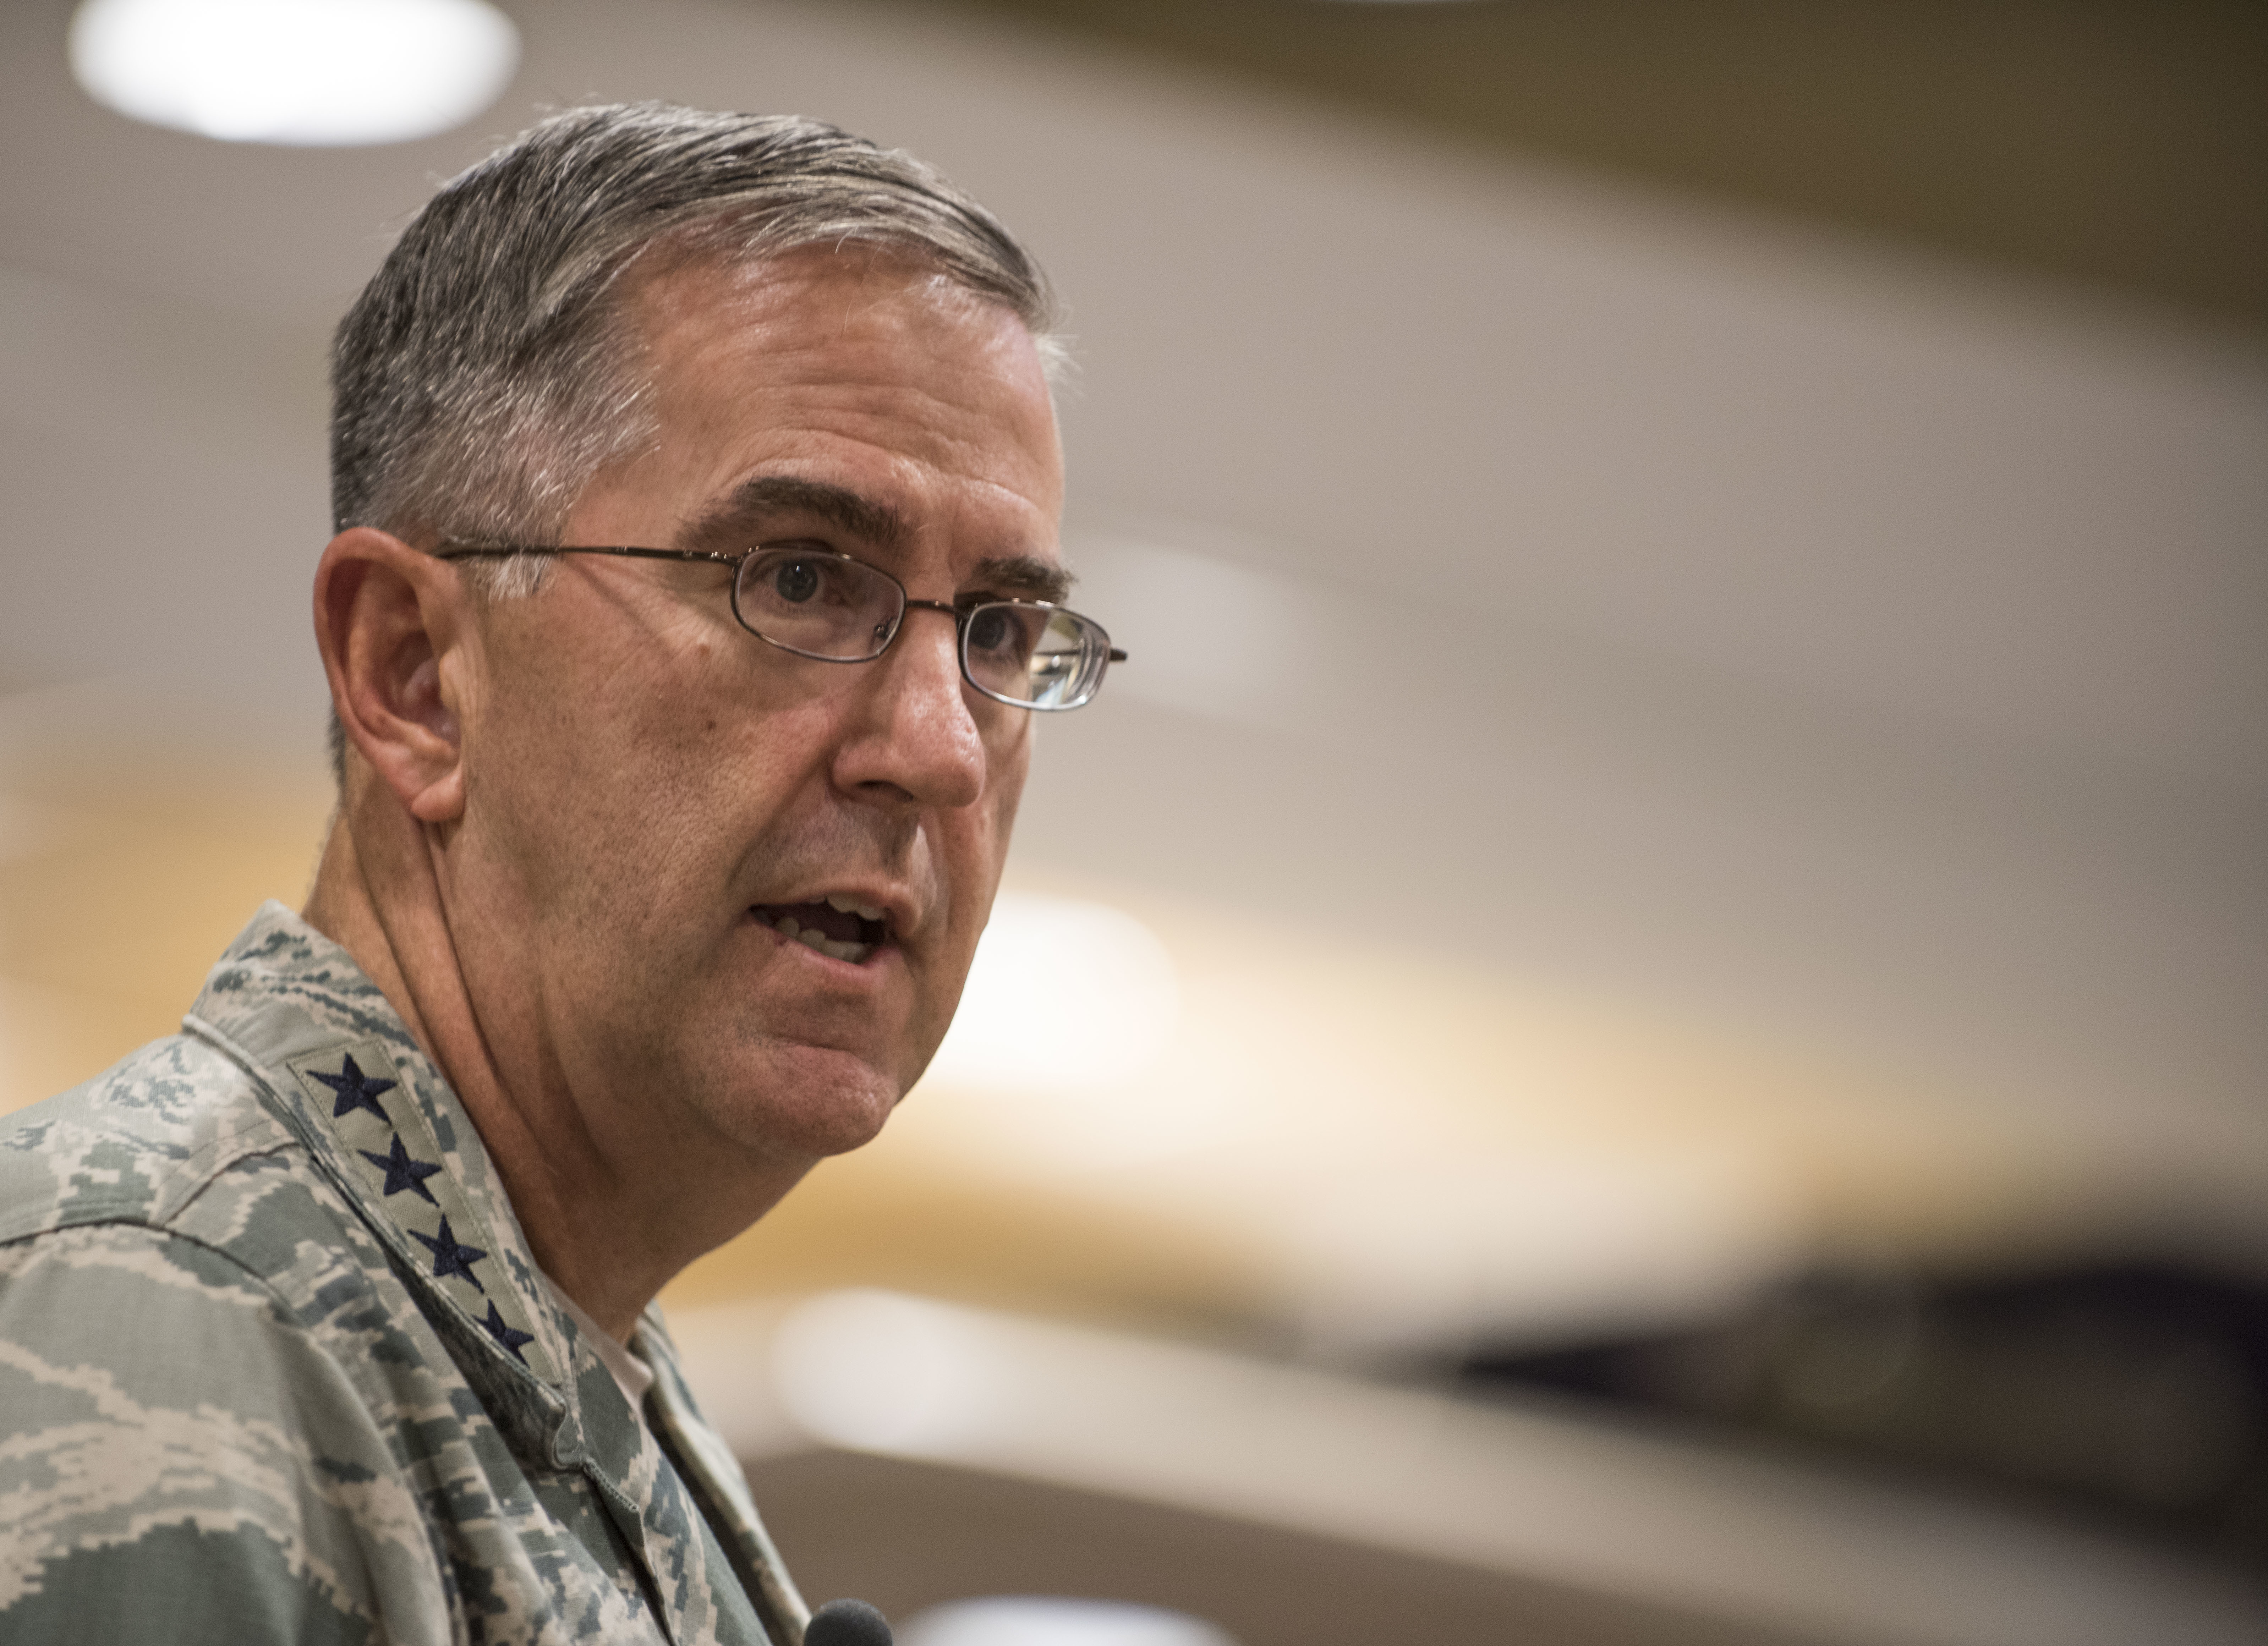 Air Force Gen. John Hyten, commander, Air Force Space Command, at the National Guard Bureau Senior Leadership Conference in Colorado Springs, Colo., Oct. 28, 2015. U.S. Army National Guard photo.